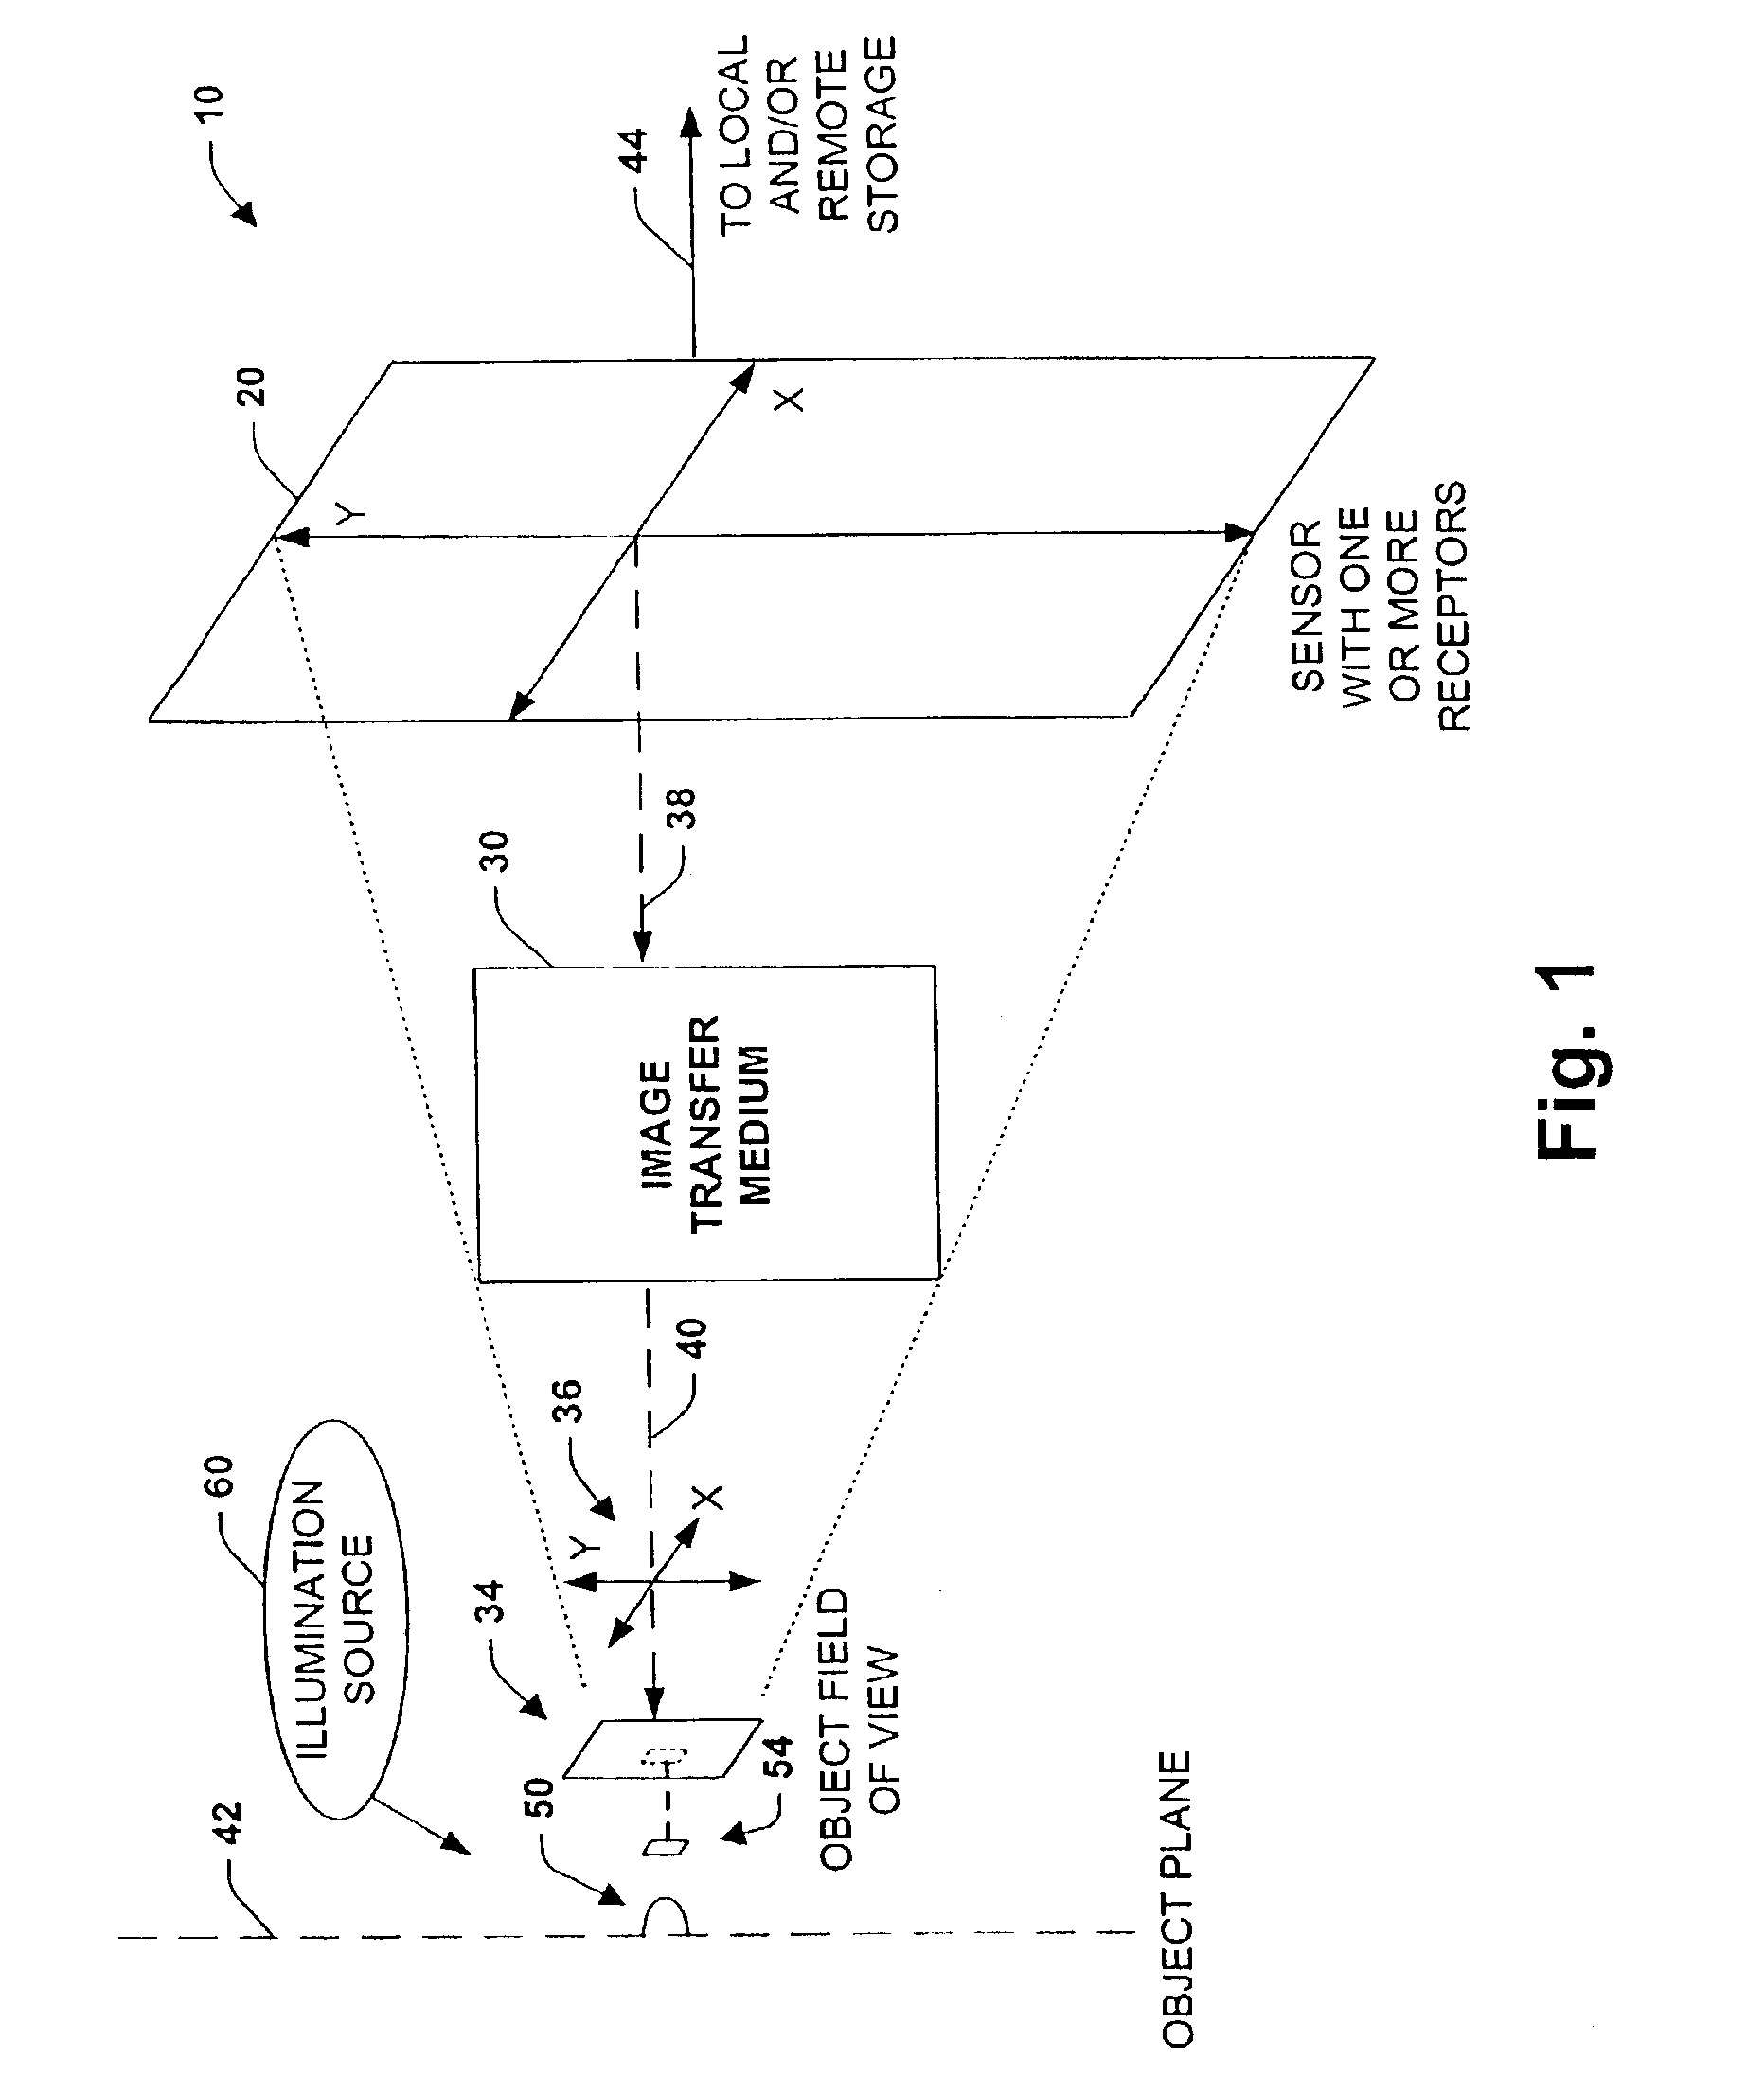 Imaging system and methodology employing reciprocal space optical design